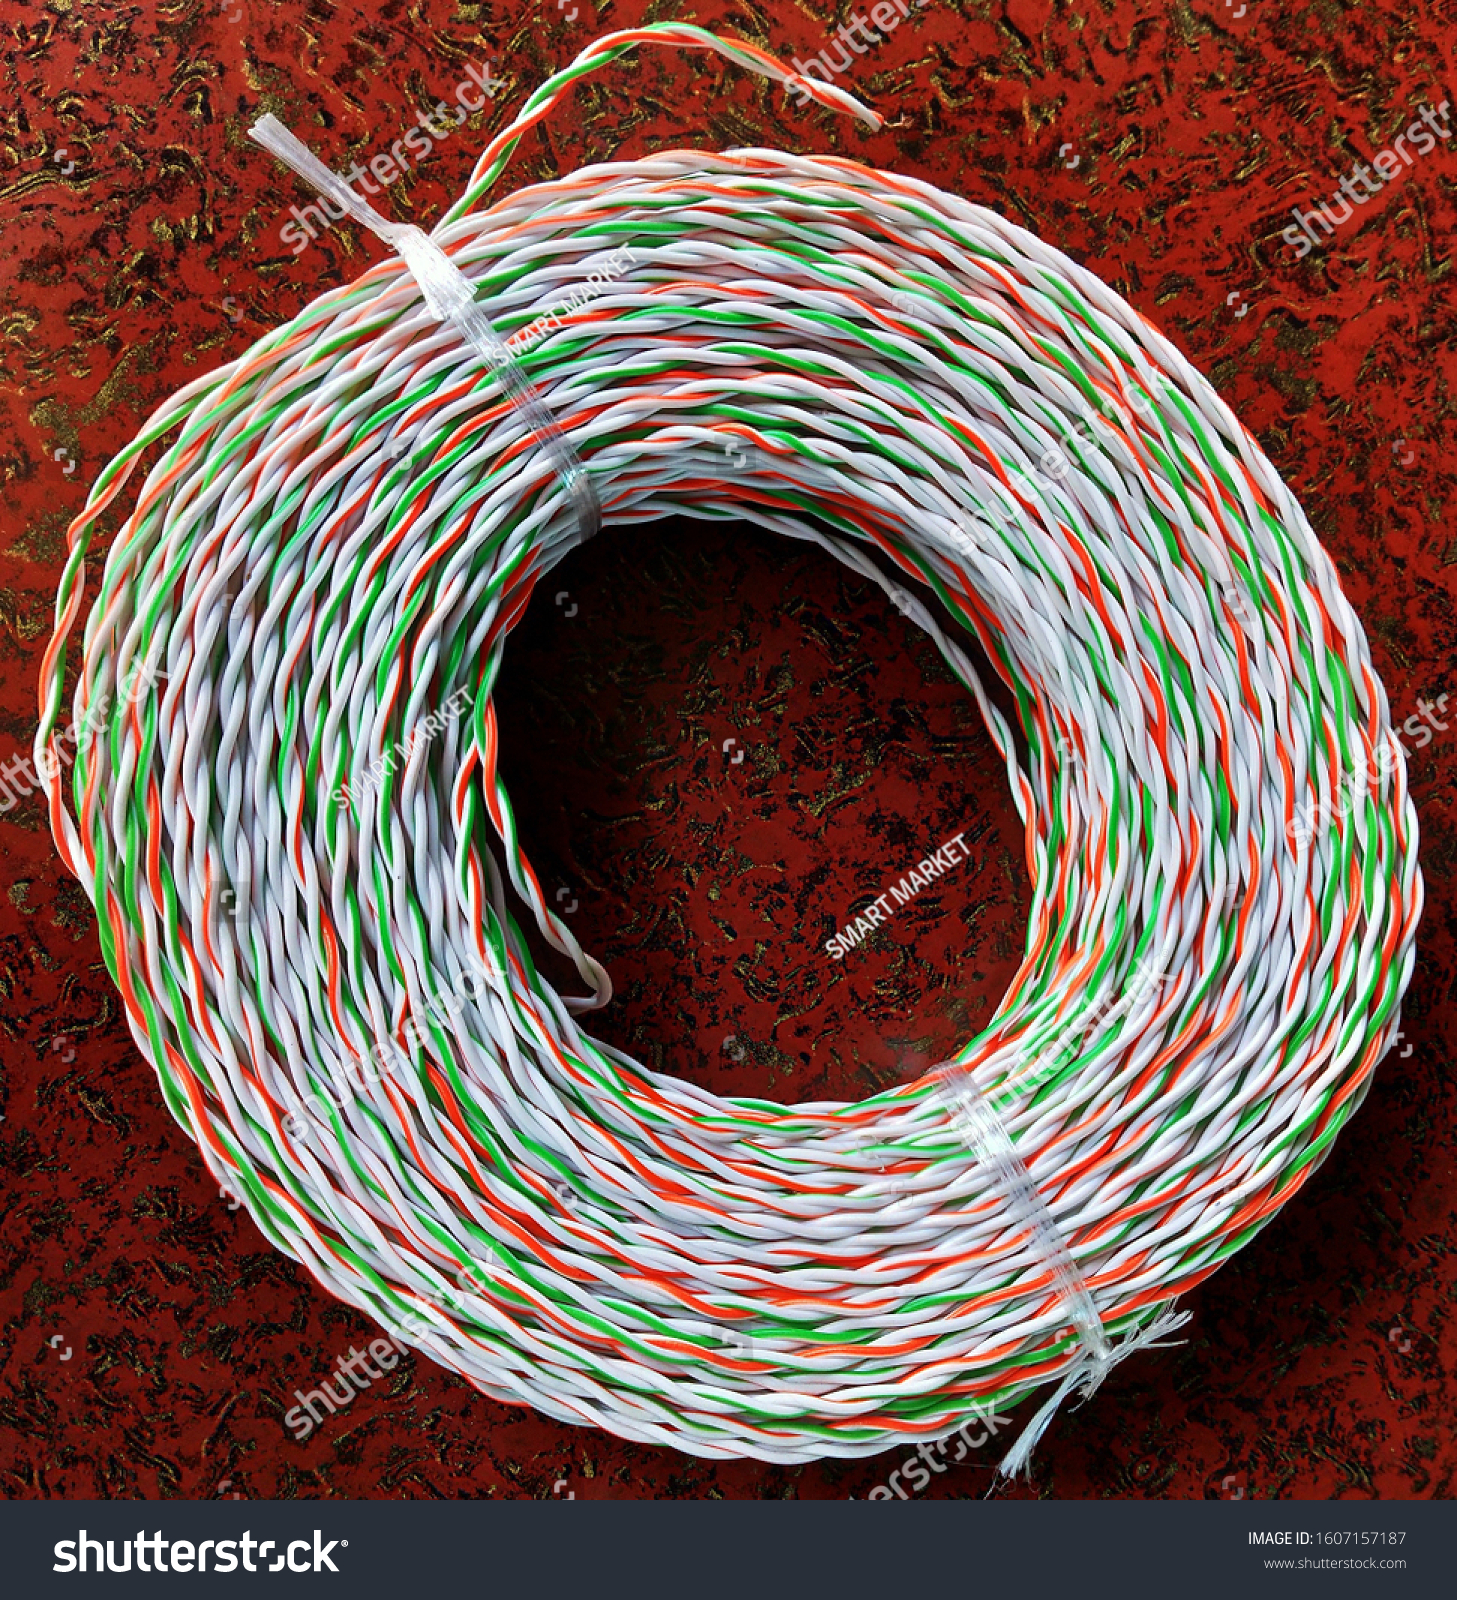 Colored wires and cables in electrical. Bundle of telecommunication multicolored cable in brown color background #1607157187